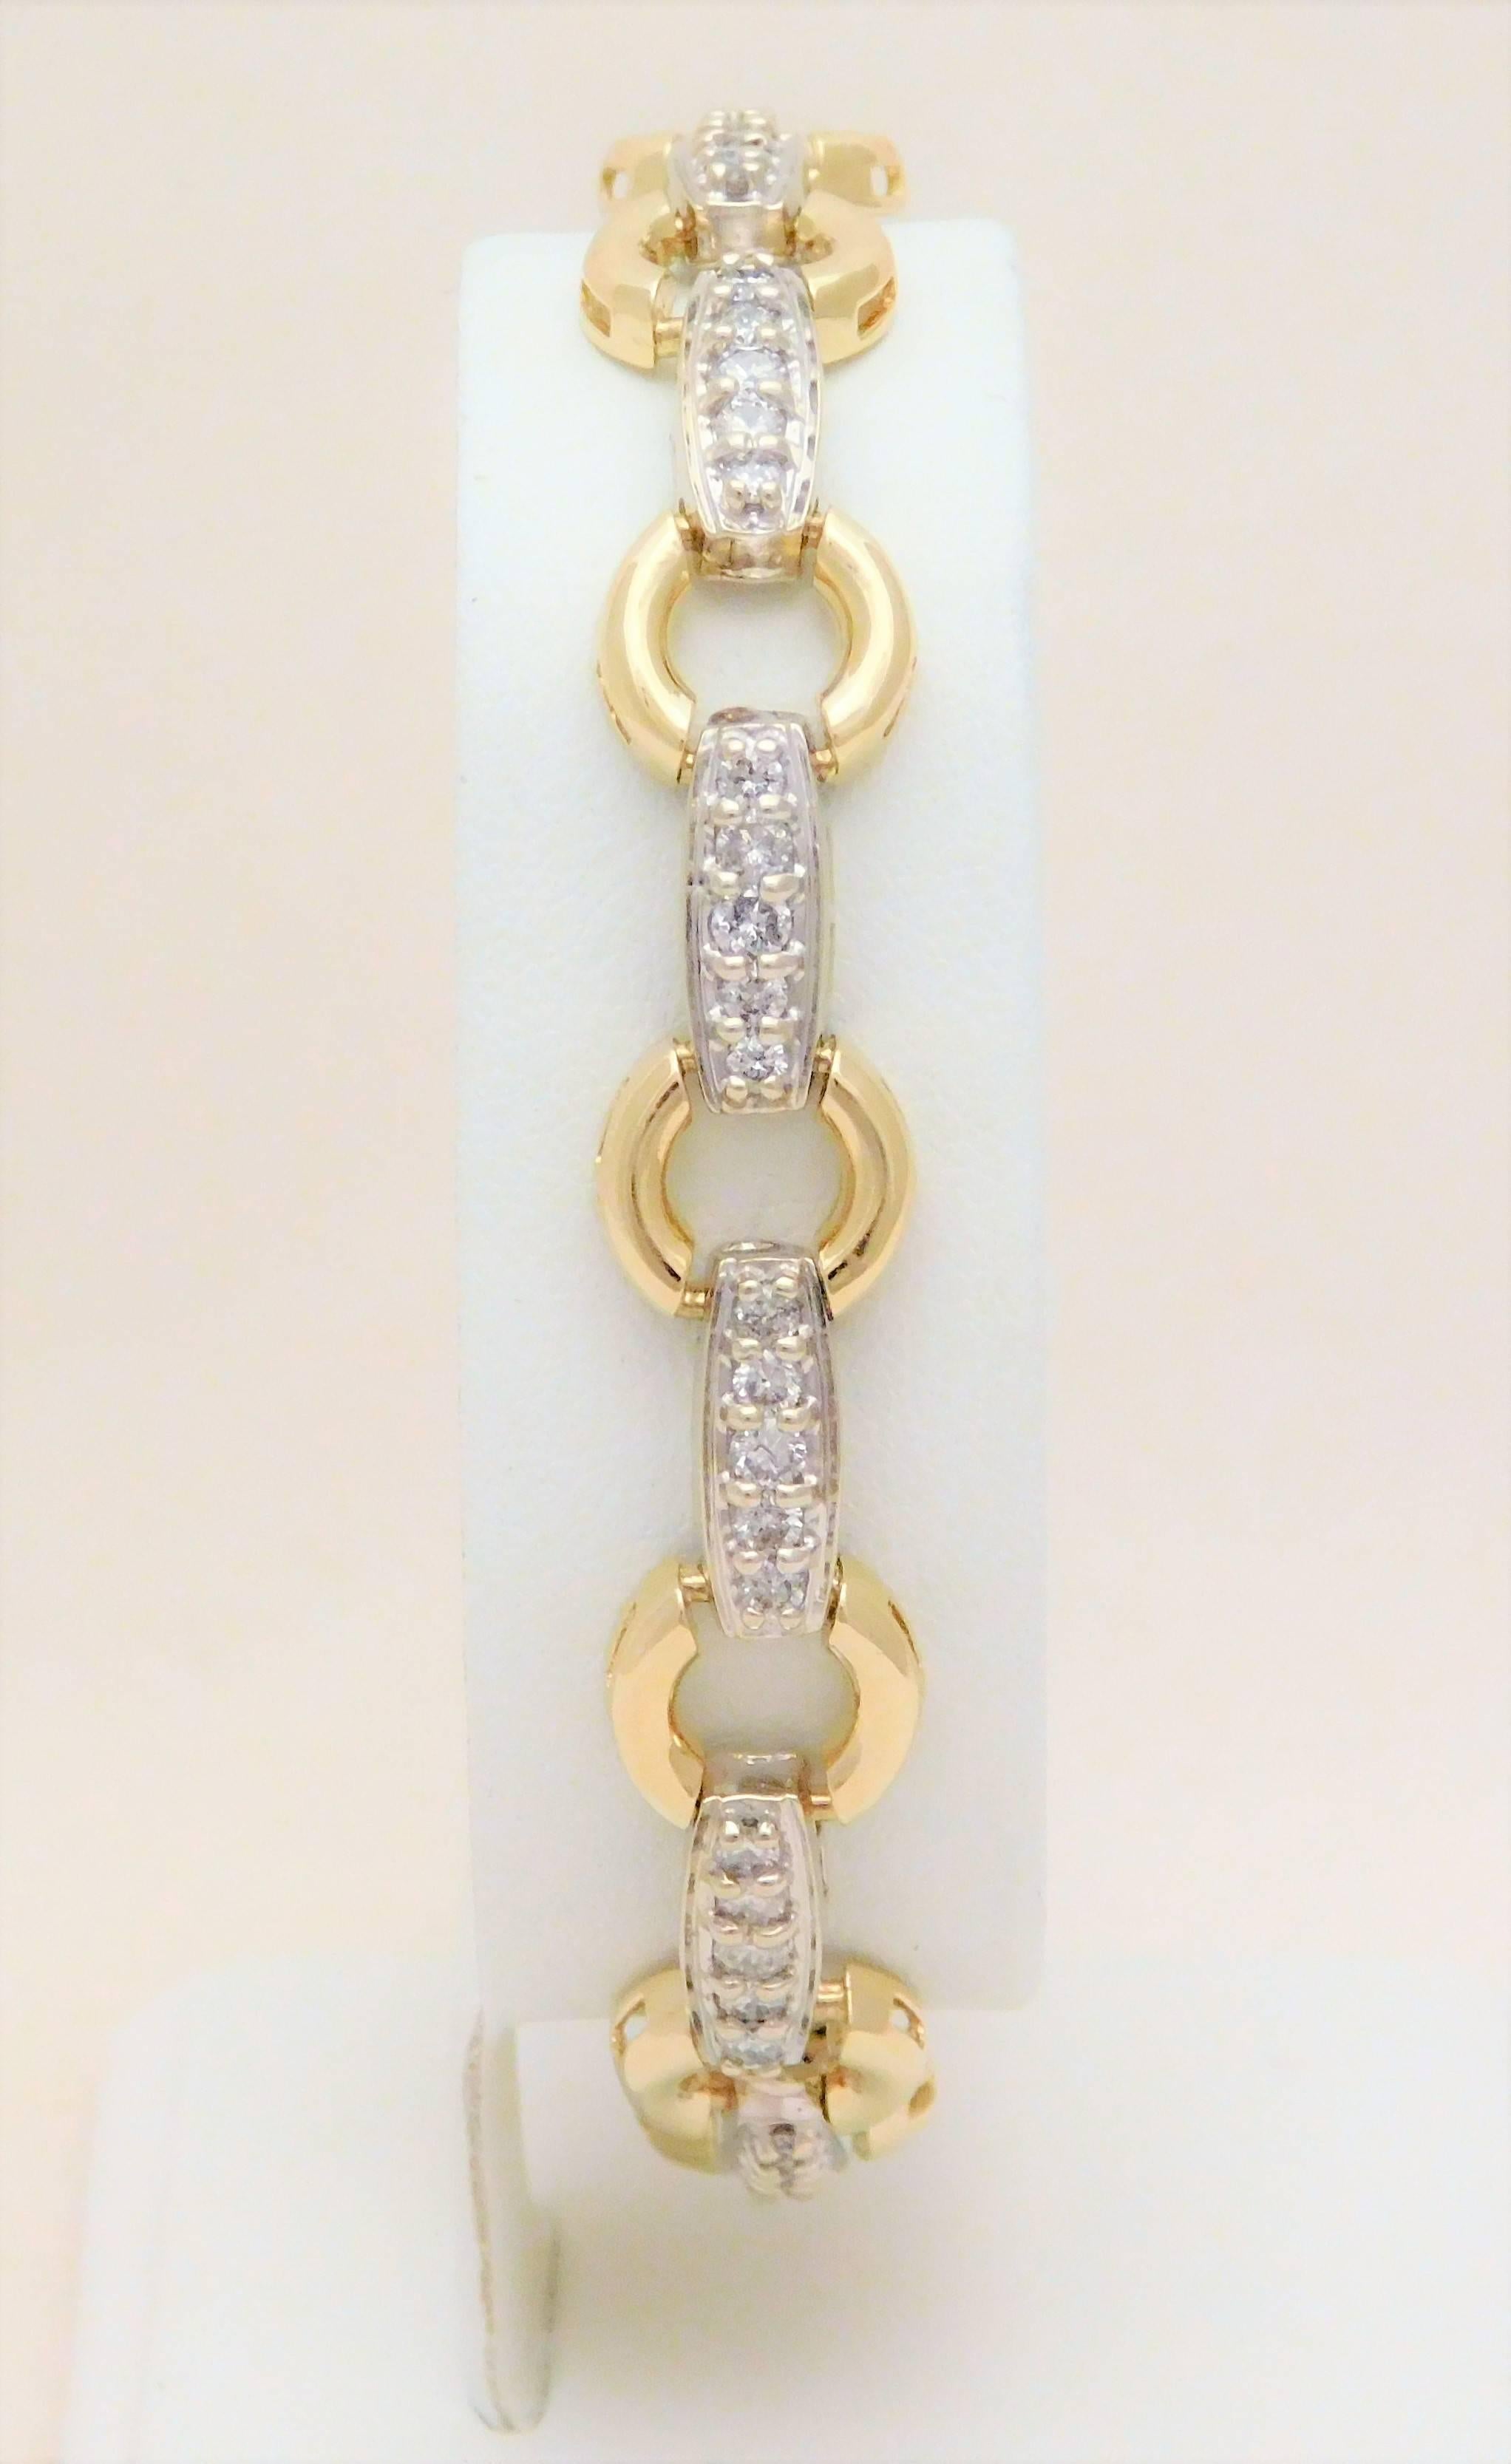 From an Southern estate.  Circa late 20th century.  This dazzling bracelet has been crafted in solid 14k yellow and 14k white gold.  It is masterfully jeweled with 55 bright and sparkling natural round brilliant-cut diamonds approximating 1.40ct in